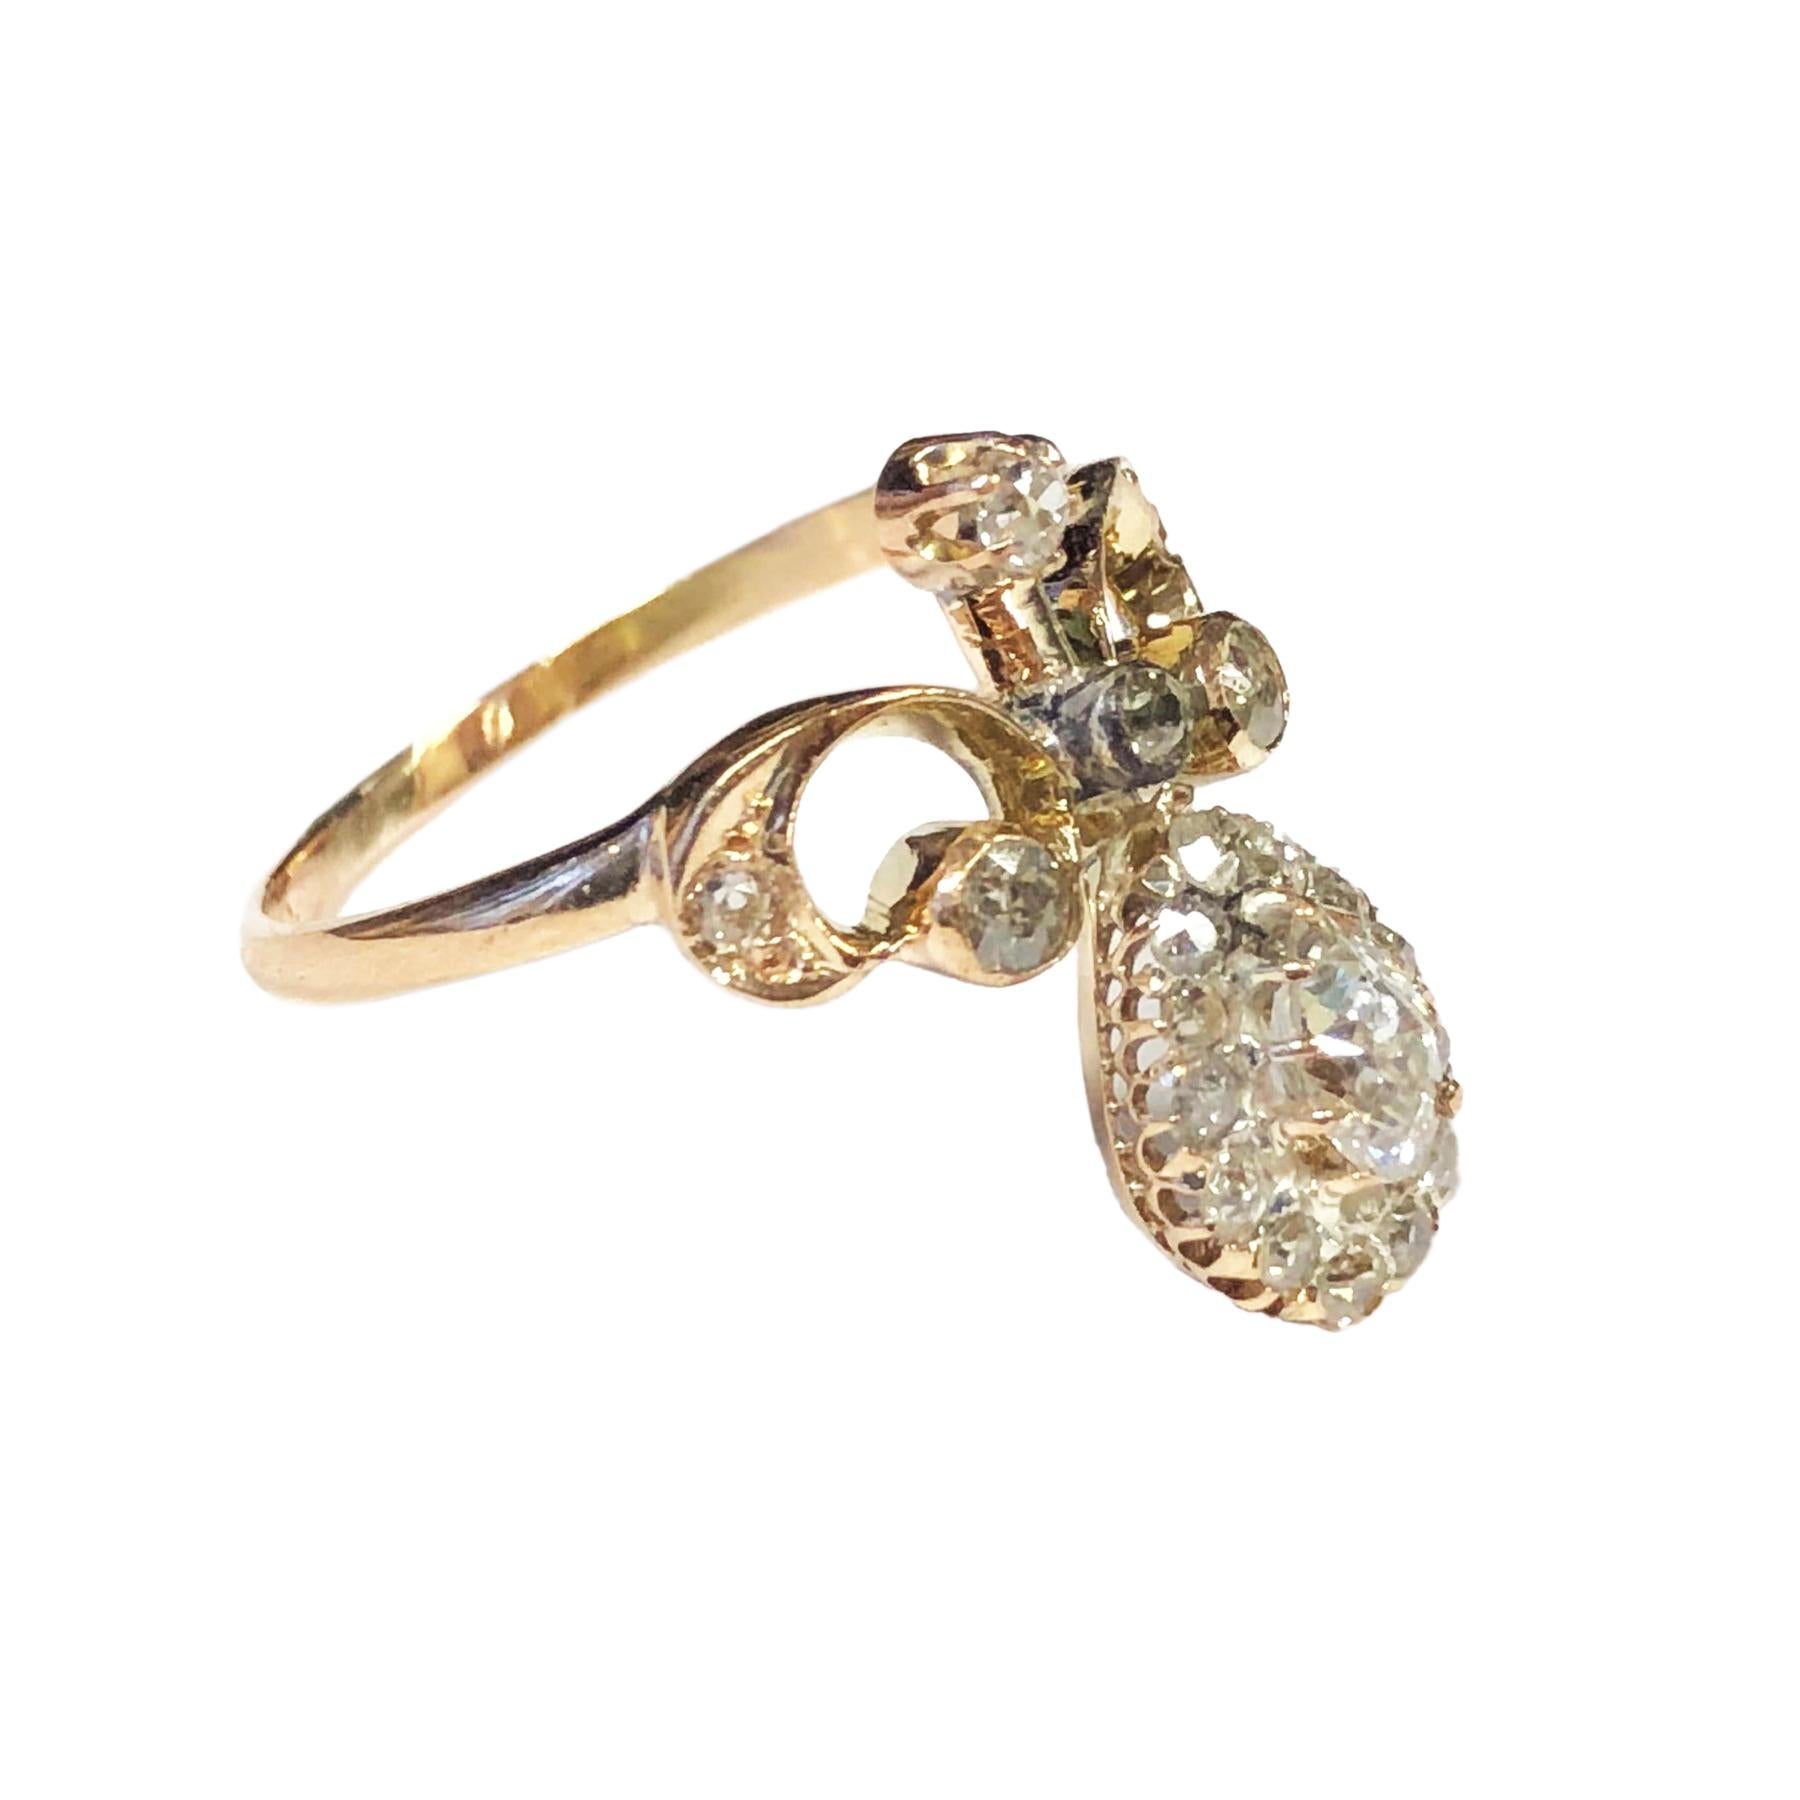 Circa 1890s Yellow Gold Tiara Ring, measuring 3/4 inch in length and centrally set with an old mine cut pear shape Diamond approximately 1/3 carat and further set with numerous old cut Diamonds totaling 1/2 carat. Finger size 8 1/2